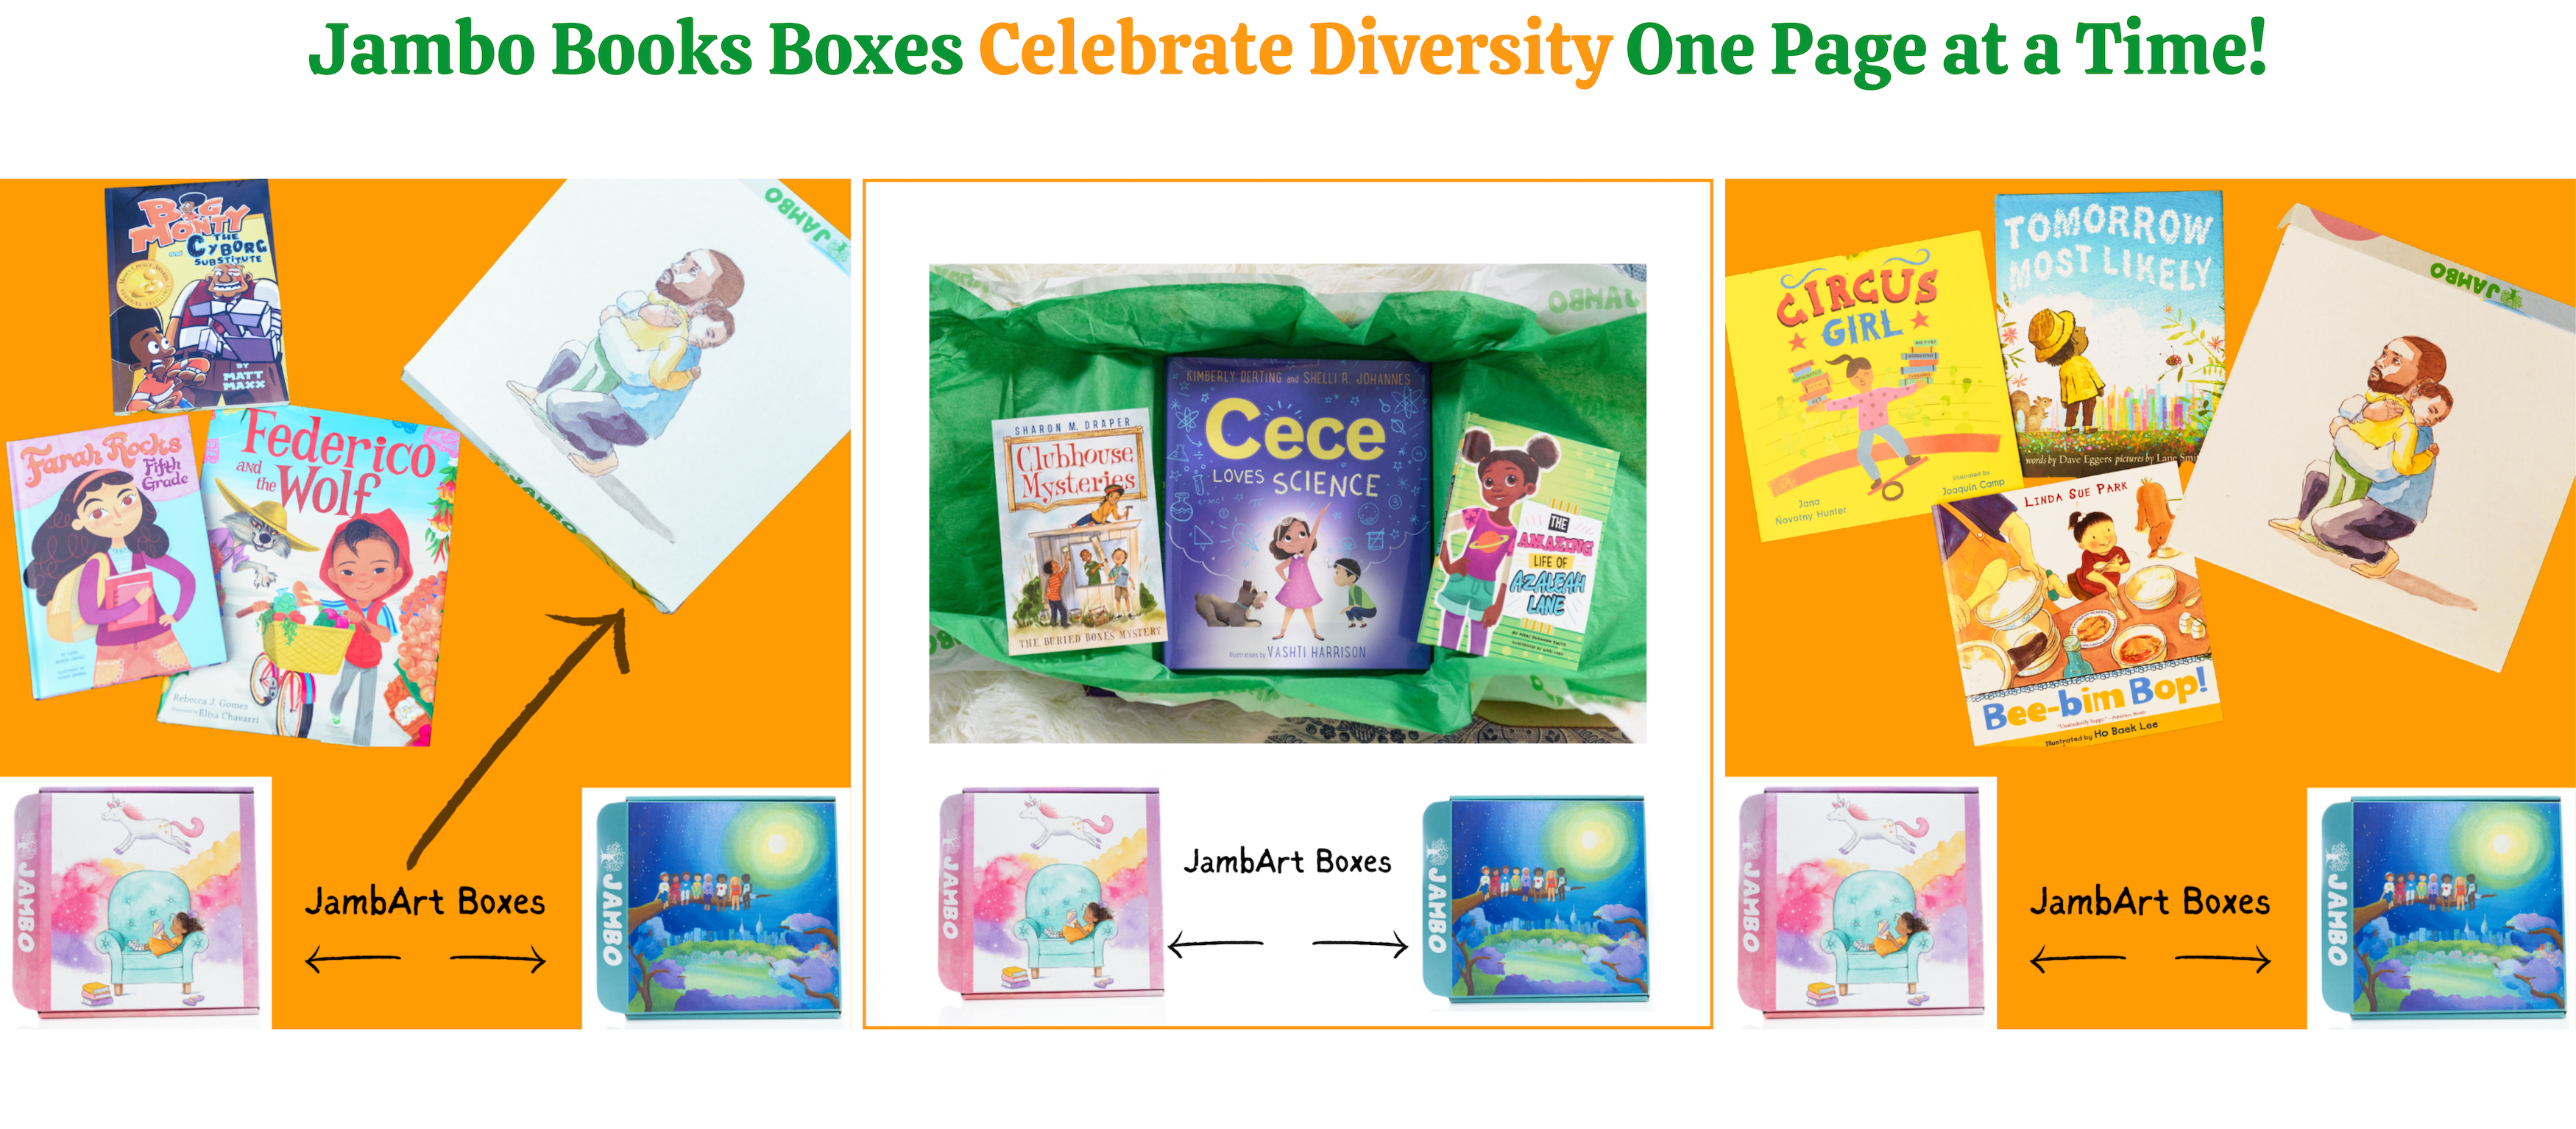 010935001534534-jambo-books-boxes-celebrate-diversity-banner-1-17108060083374.png